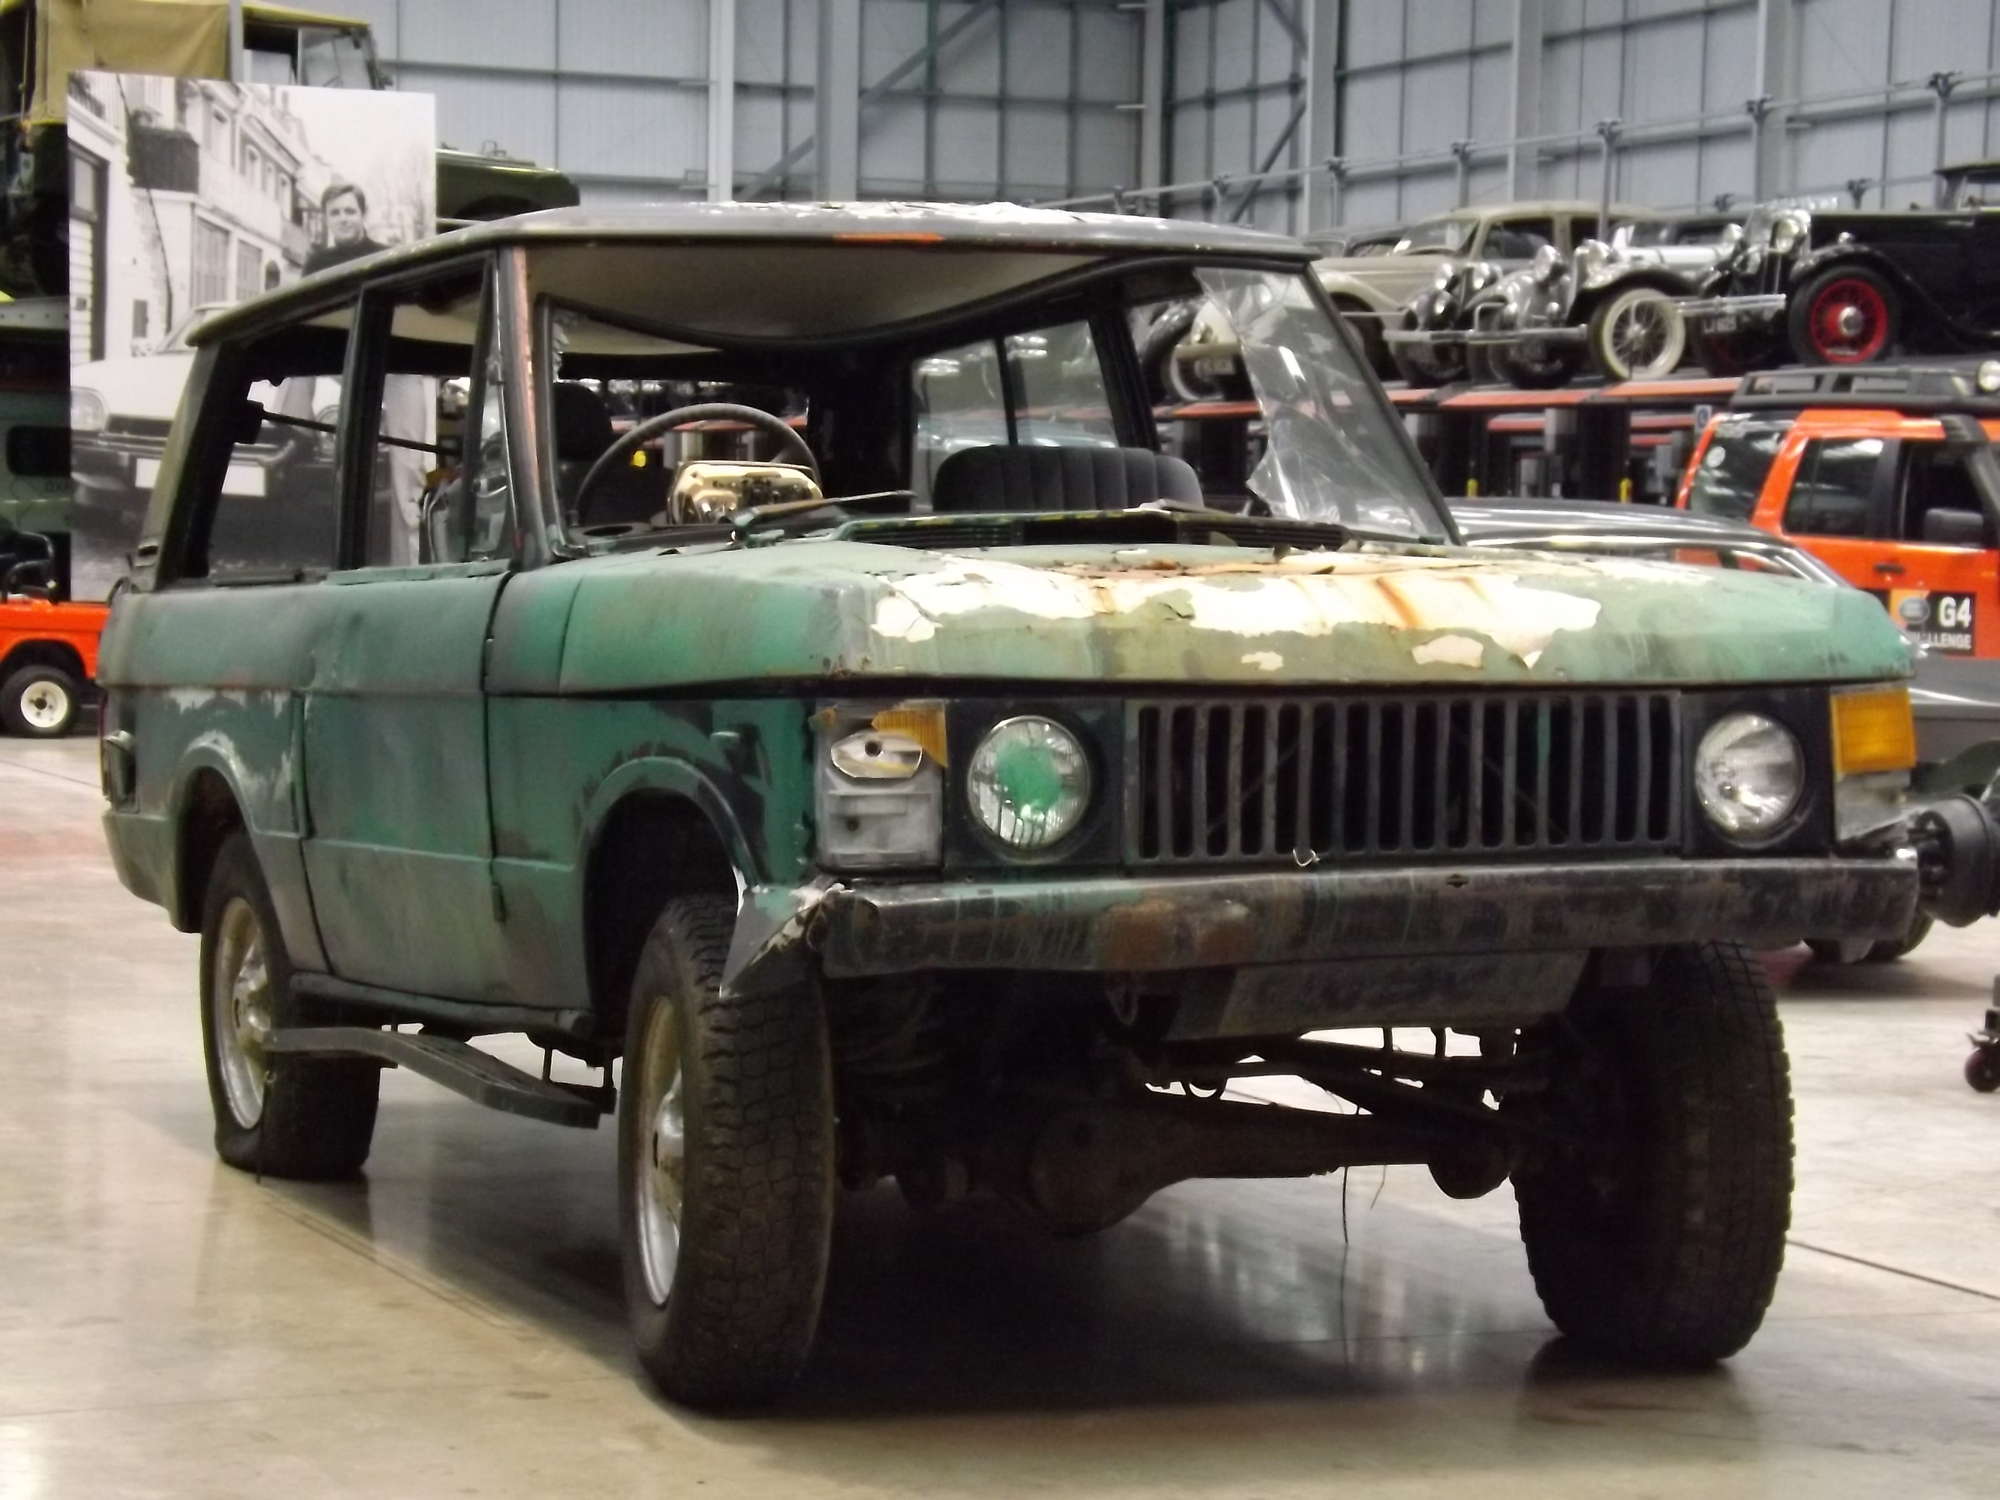 Get Up, Stand Up and restore Bob Marley’s old Range Rover